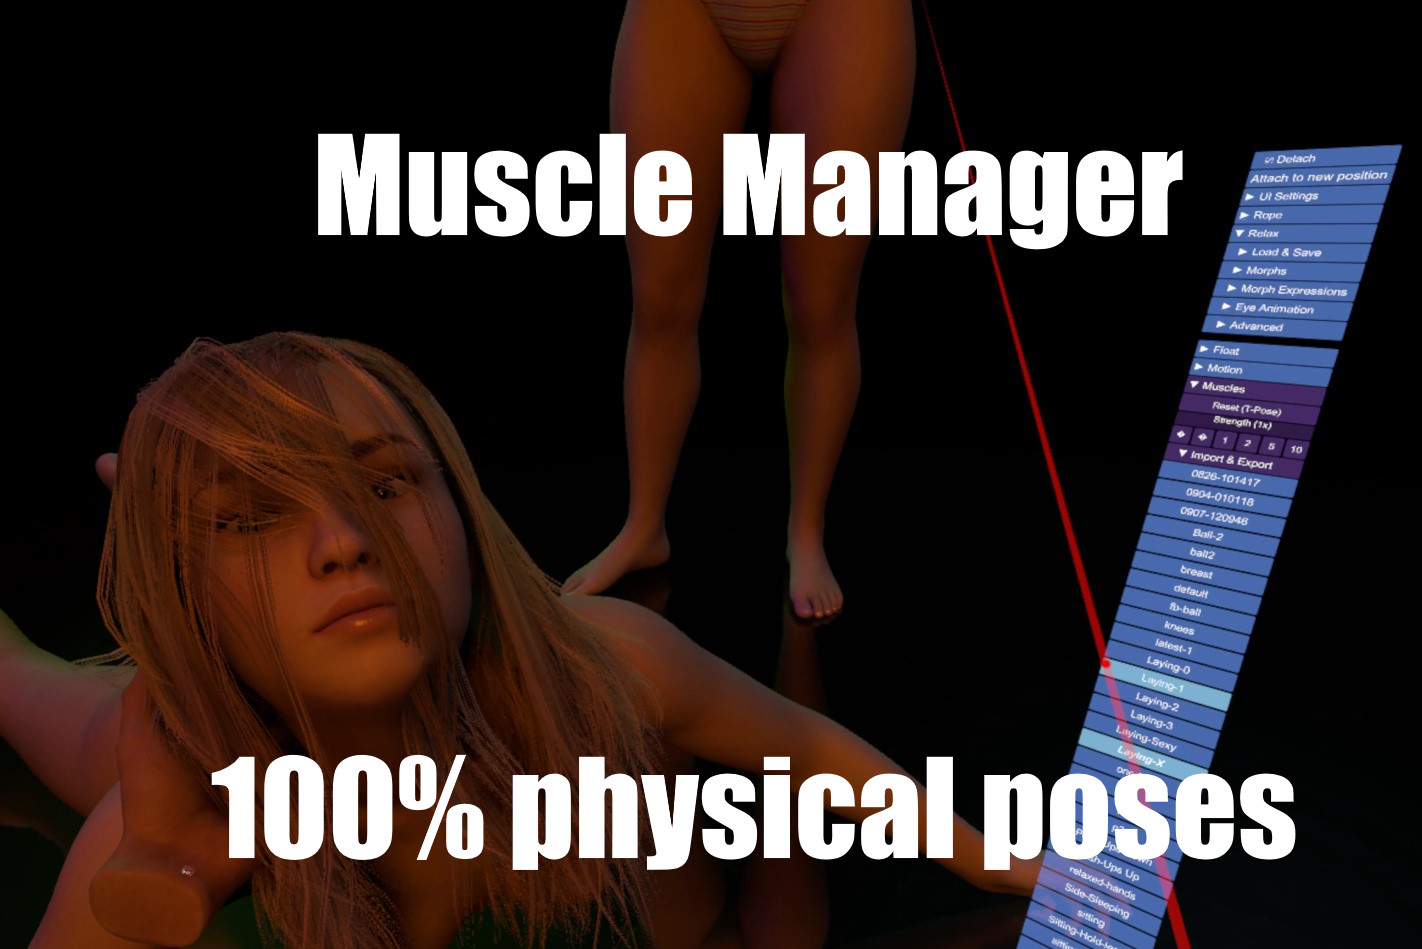 muscle-manager-2.jpg